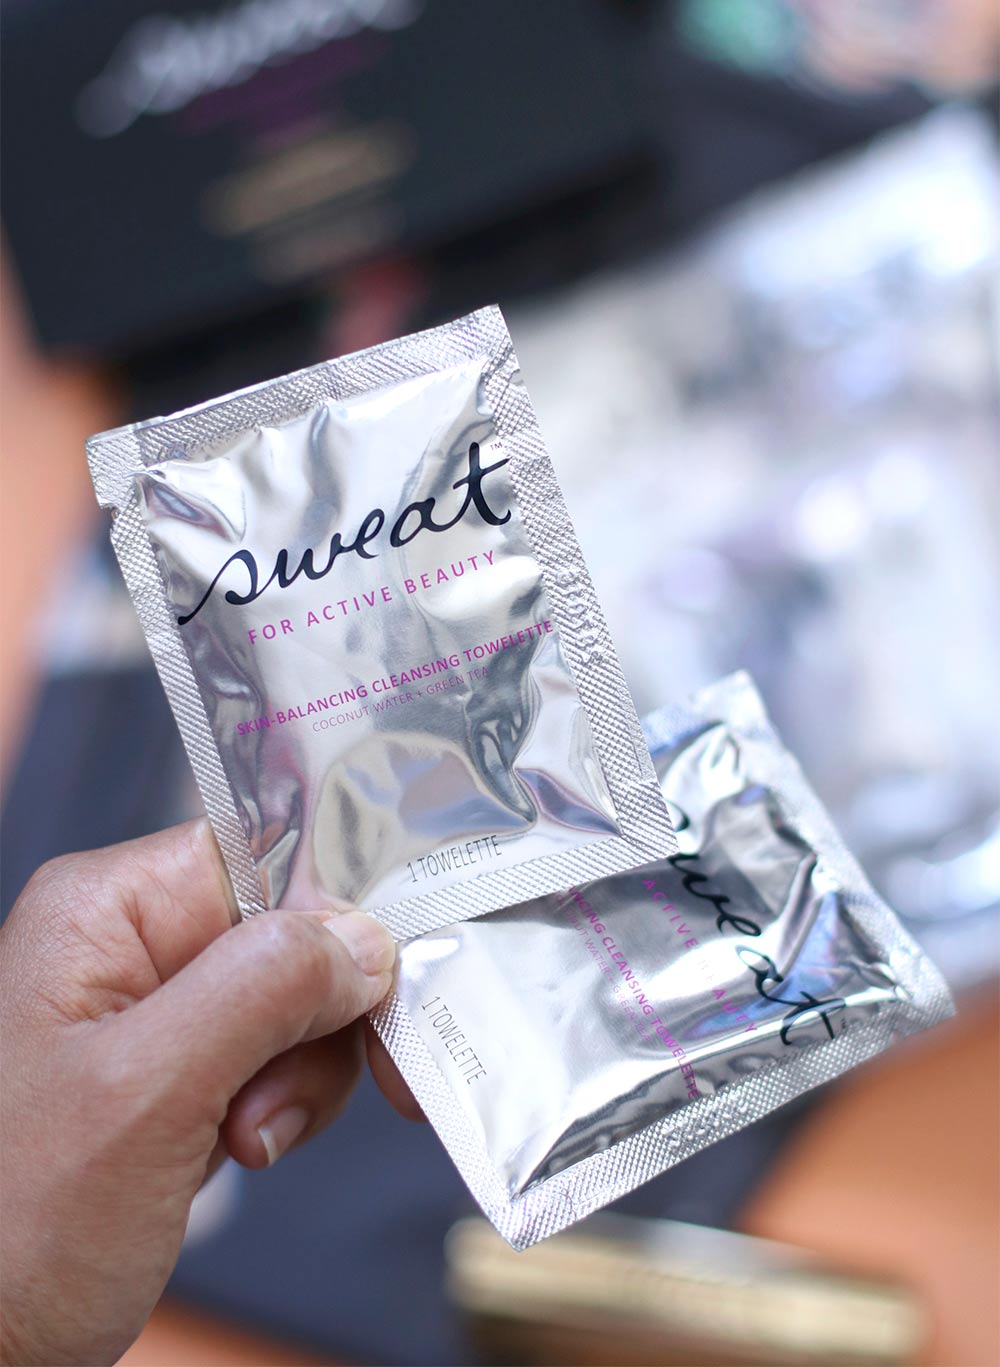 sweat cosmetics skin balancing cleansing towelettes